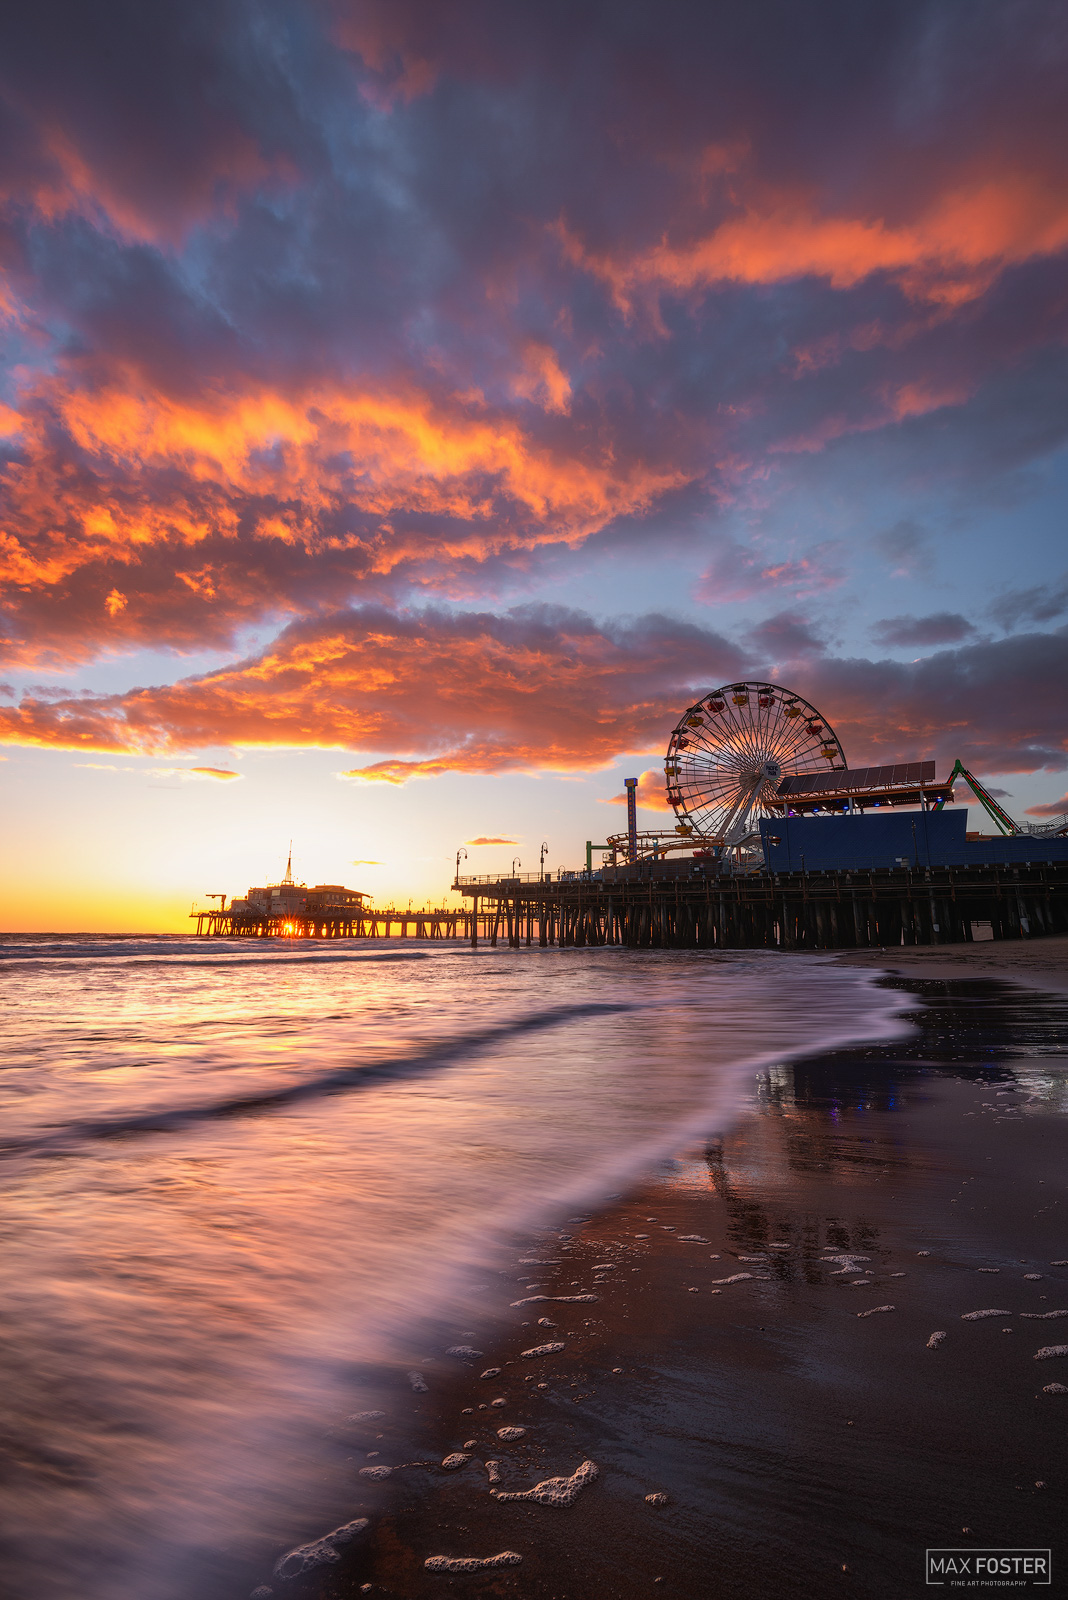 Add color to your walls with Kaleidoscope Skies, Max Foster's limited edition photography print of the Santa Monica Pier in California...